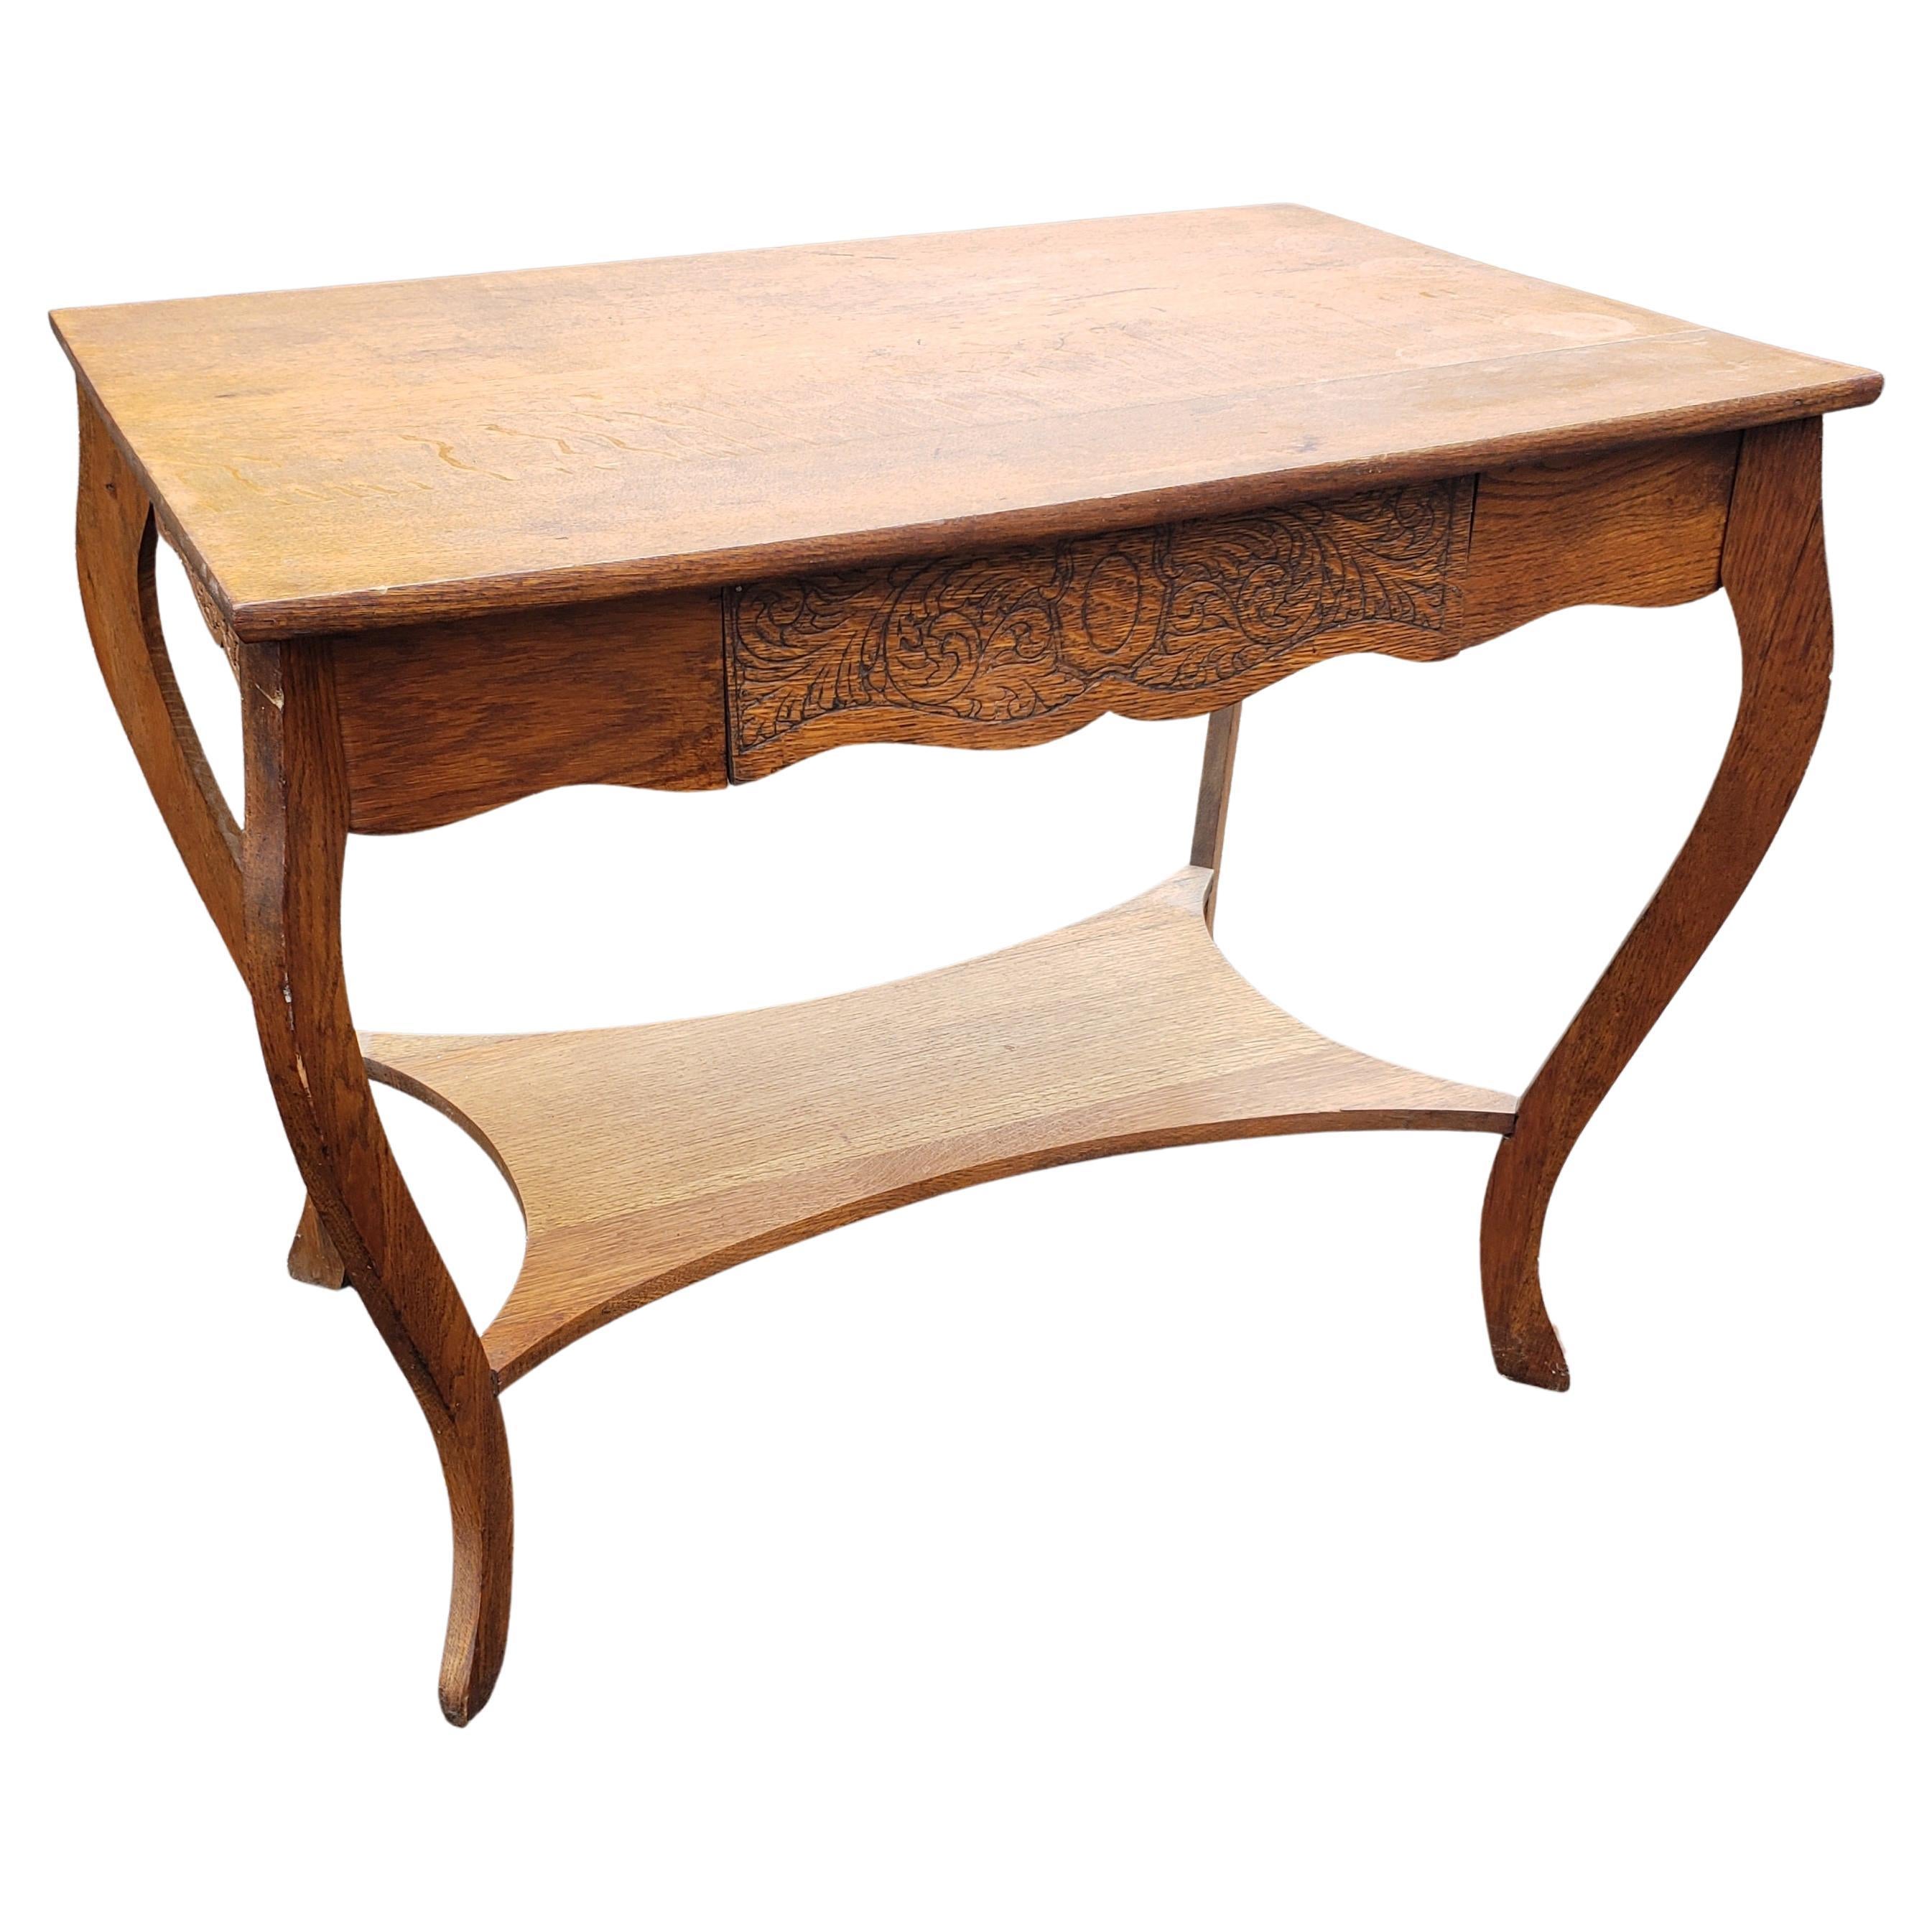 Larkin Solid Antique Oak Quatersawn Table, circa 1900s In Good Condition For Sale In Germantown, MD